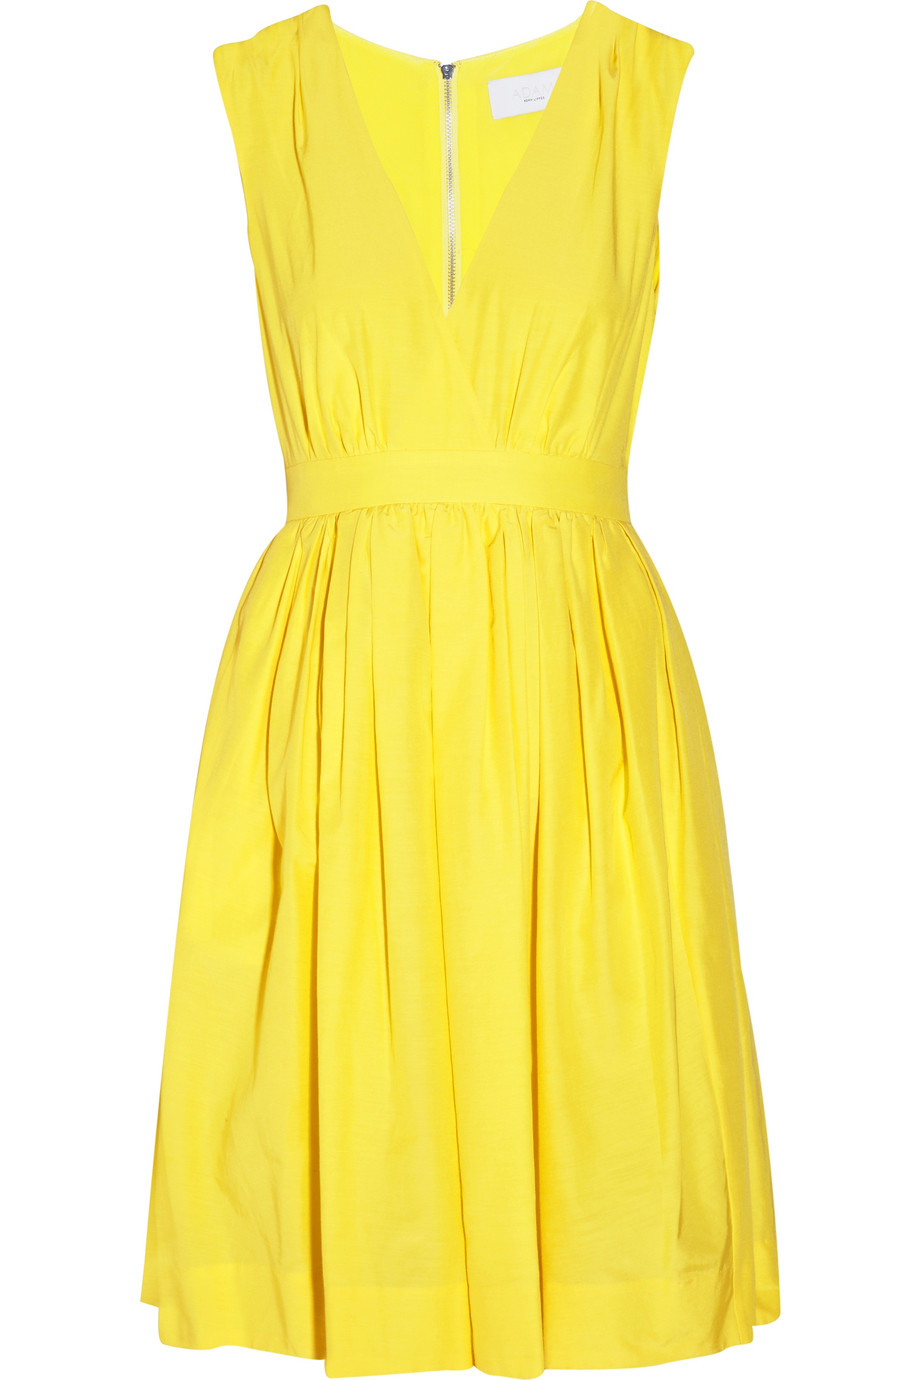 Lyst - Adam Lippes Silk and Cotton-blend Full Dress in Yellow